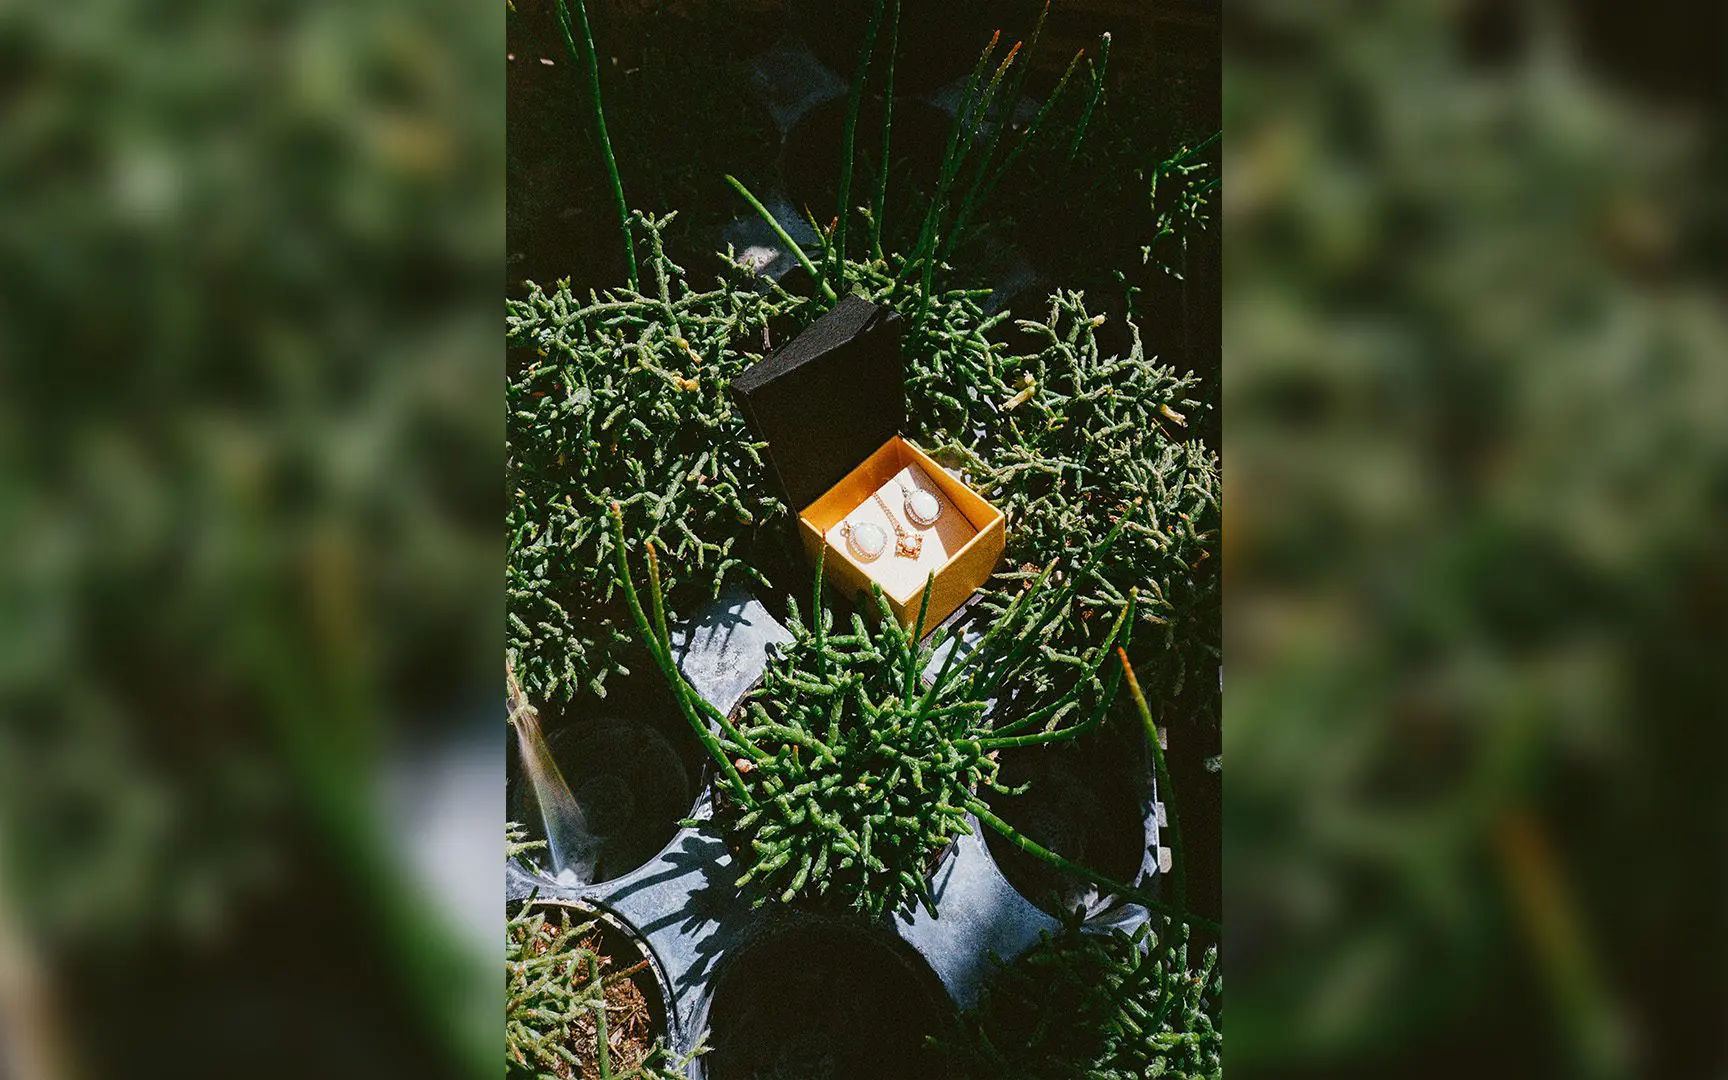 A pair of glasses resting on a book situated amidst dense greenery, bathed in sunlight.